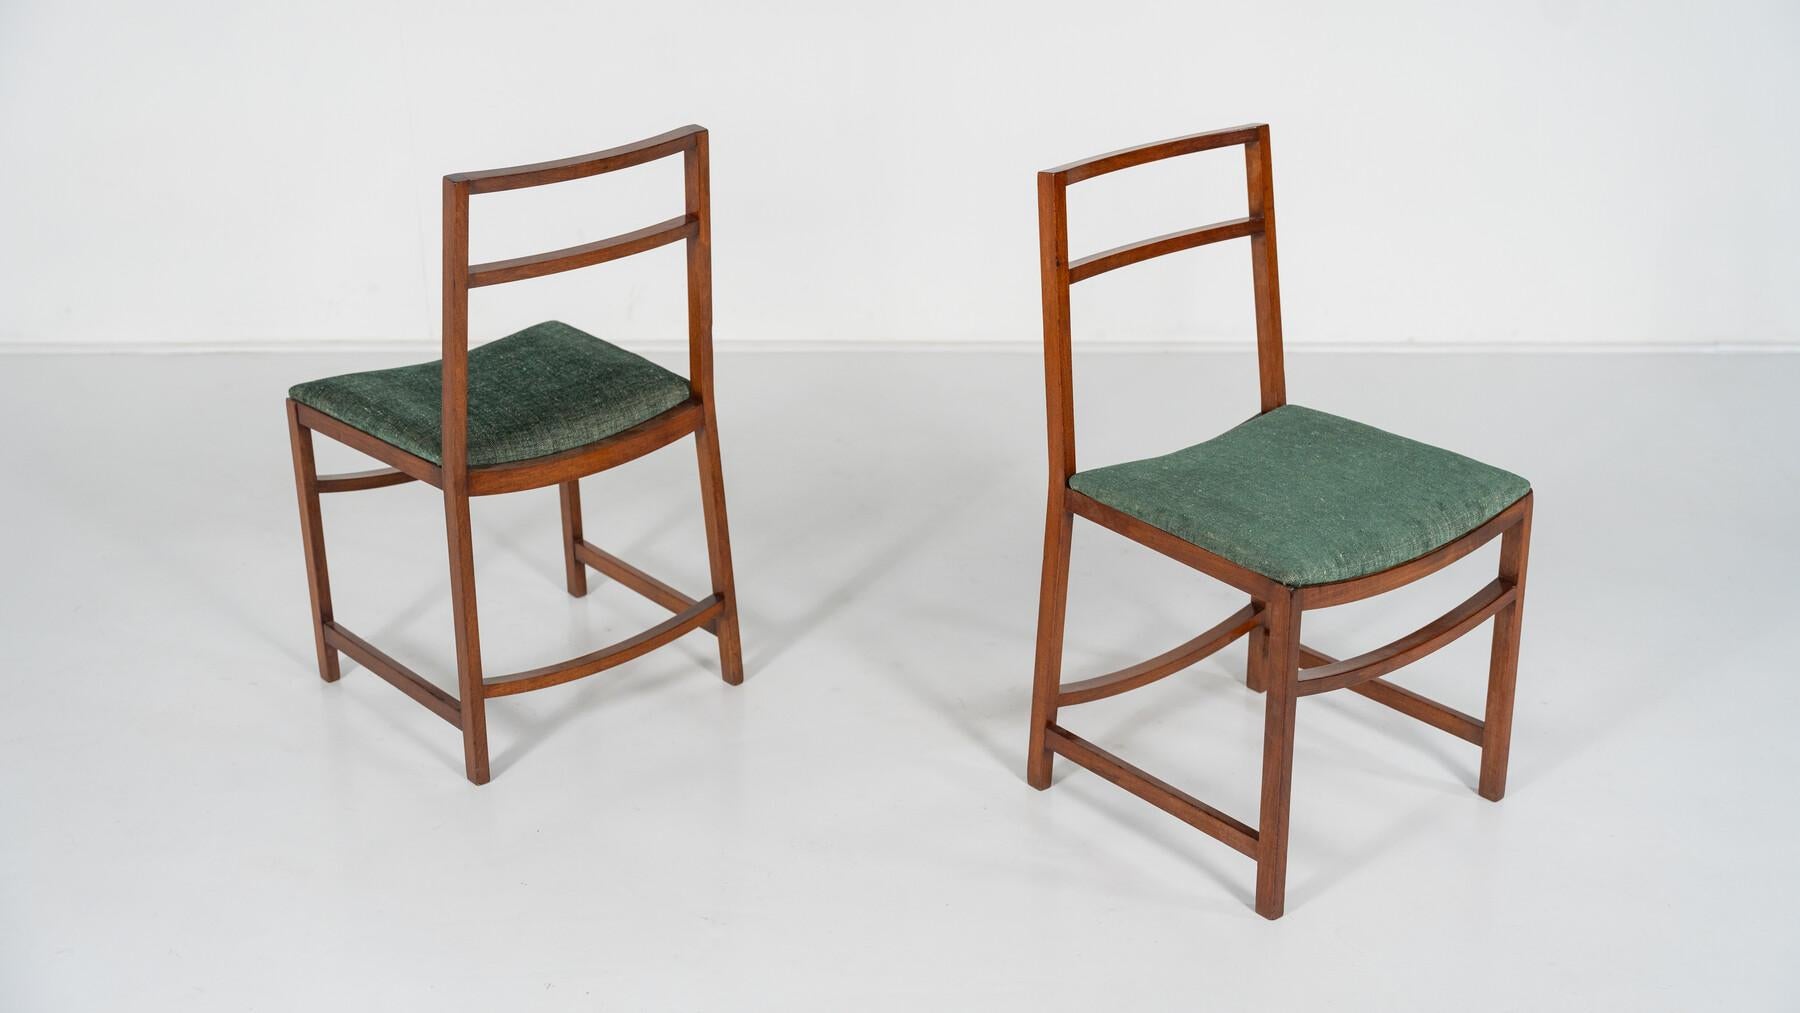 Set of 8 Mid-Century Modern Dining Chairs by Renato Venturi for MIM, 1950s For Sale 5